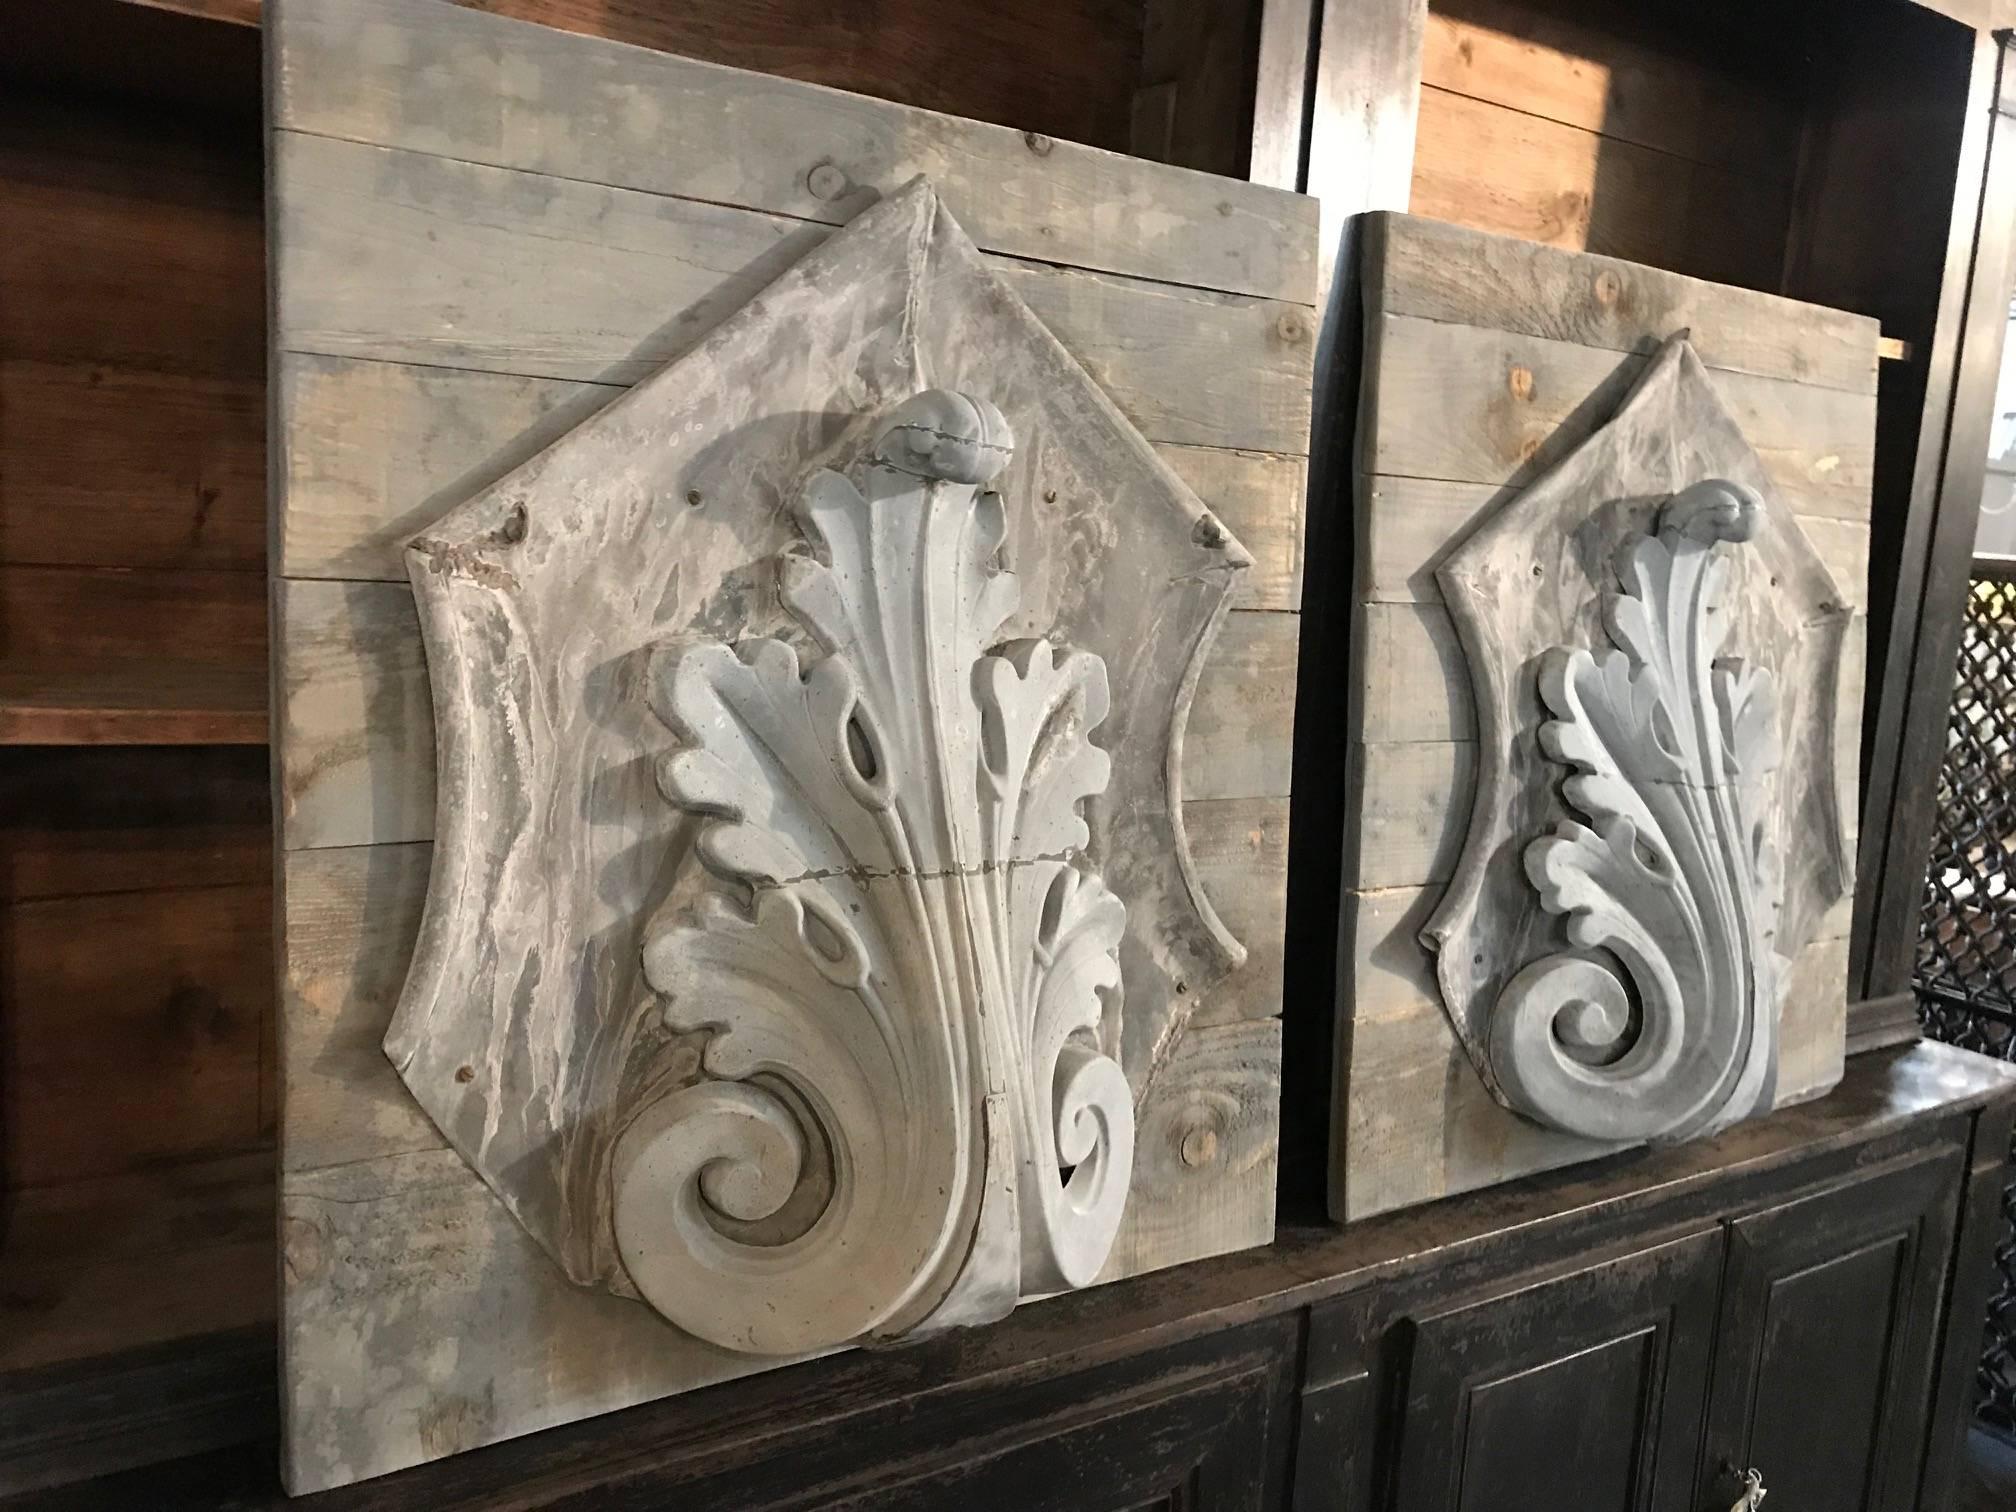 A delightful pair of 19th century zinc architectural fragments from a building in Paris - now mounted on wooden panels. Terrific architectural artwork for any interior or exterior.